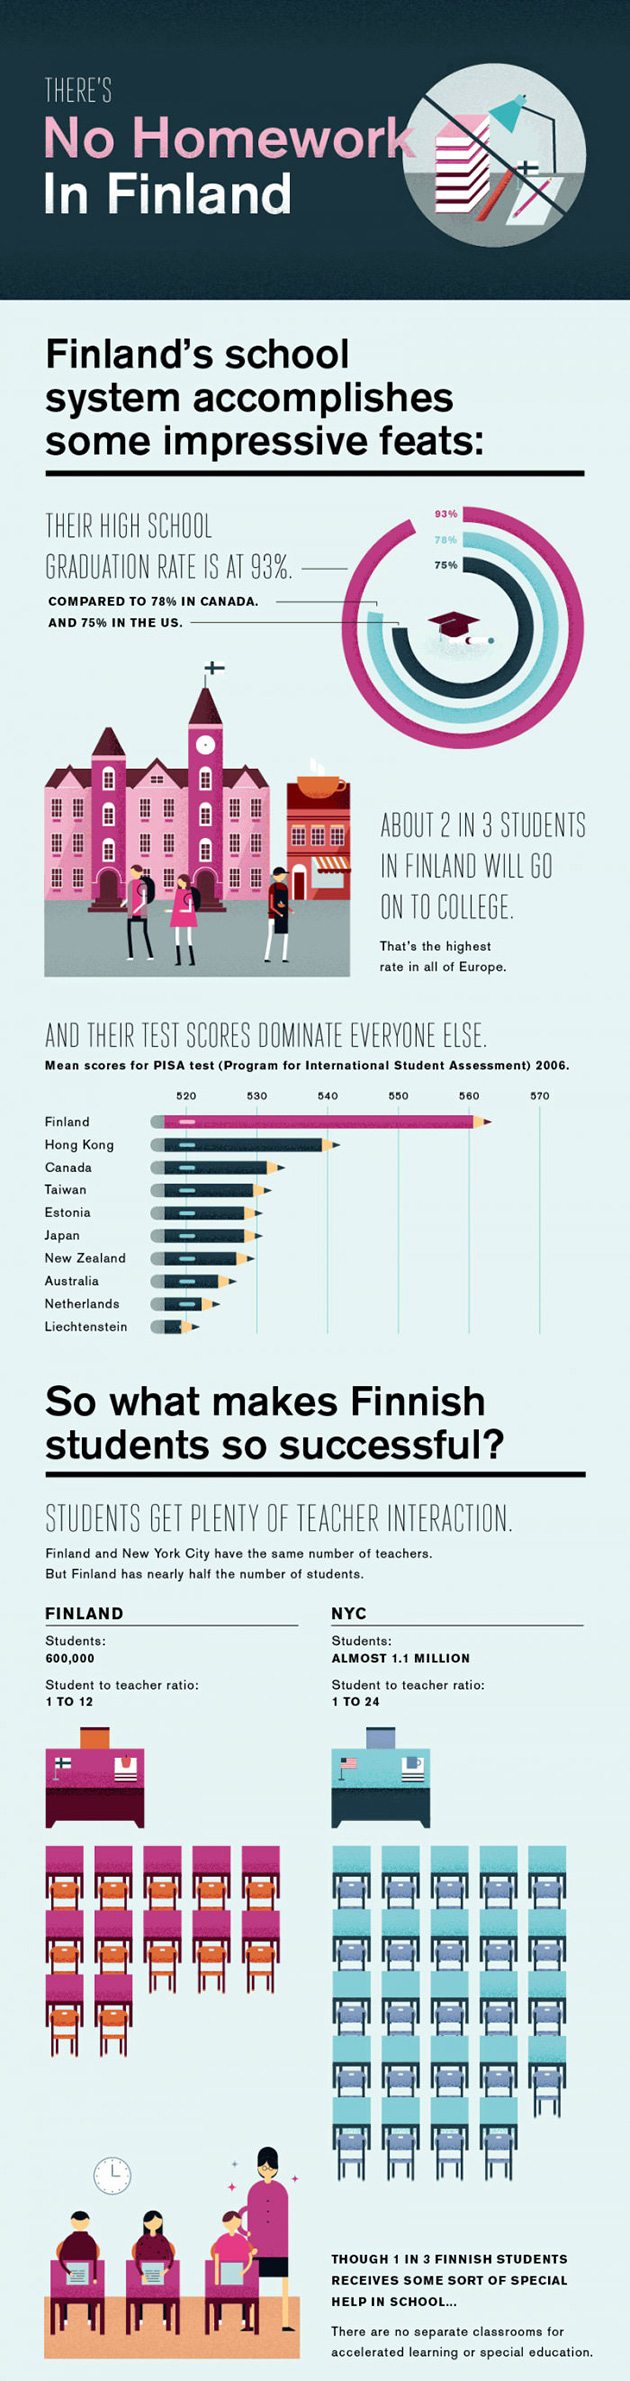 There's no homework in Finland_01